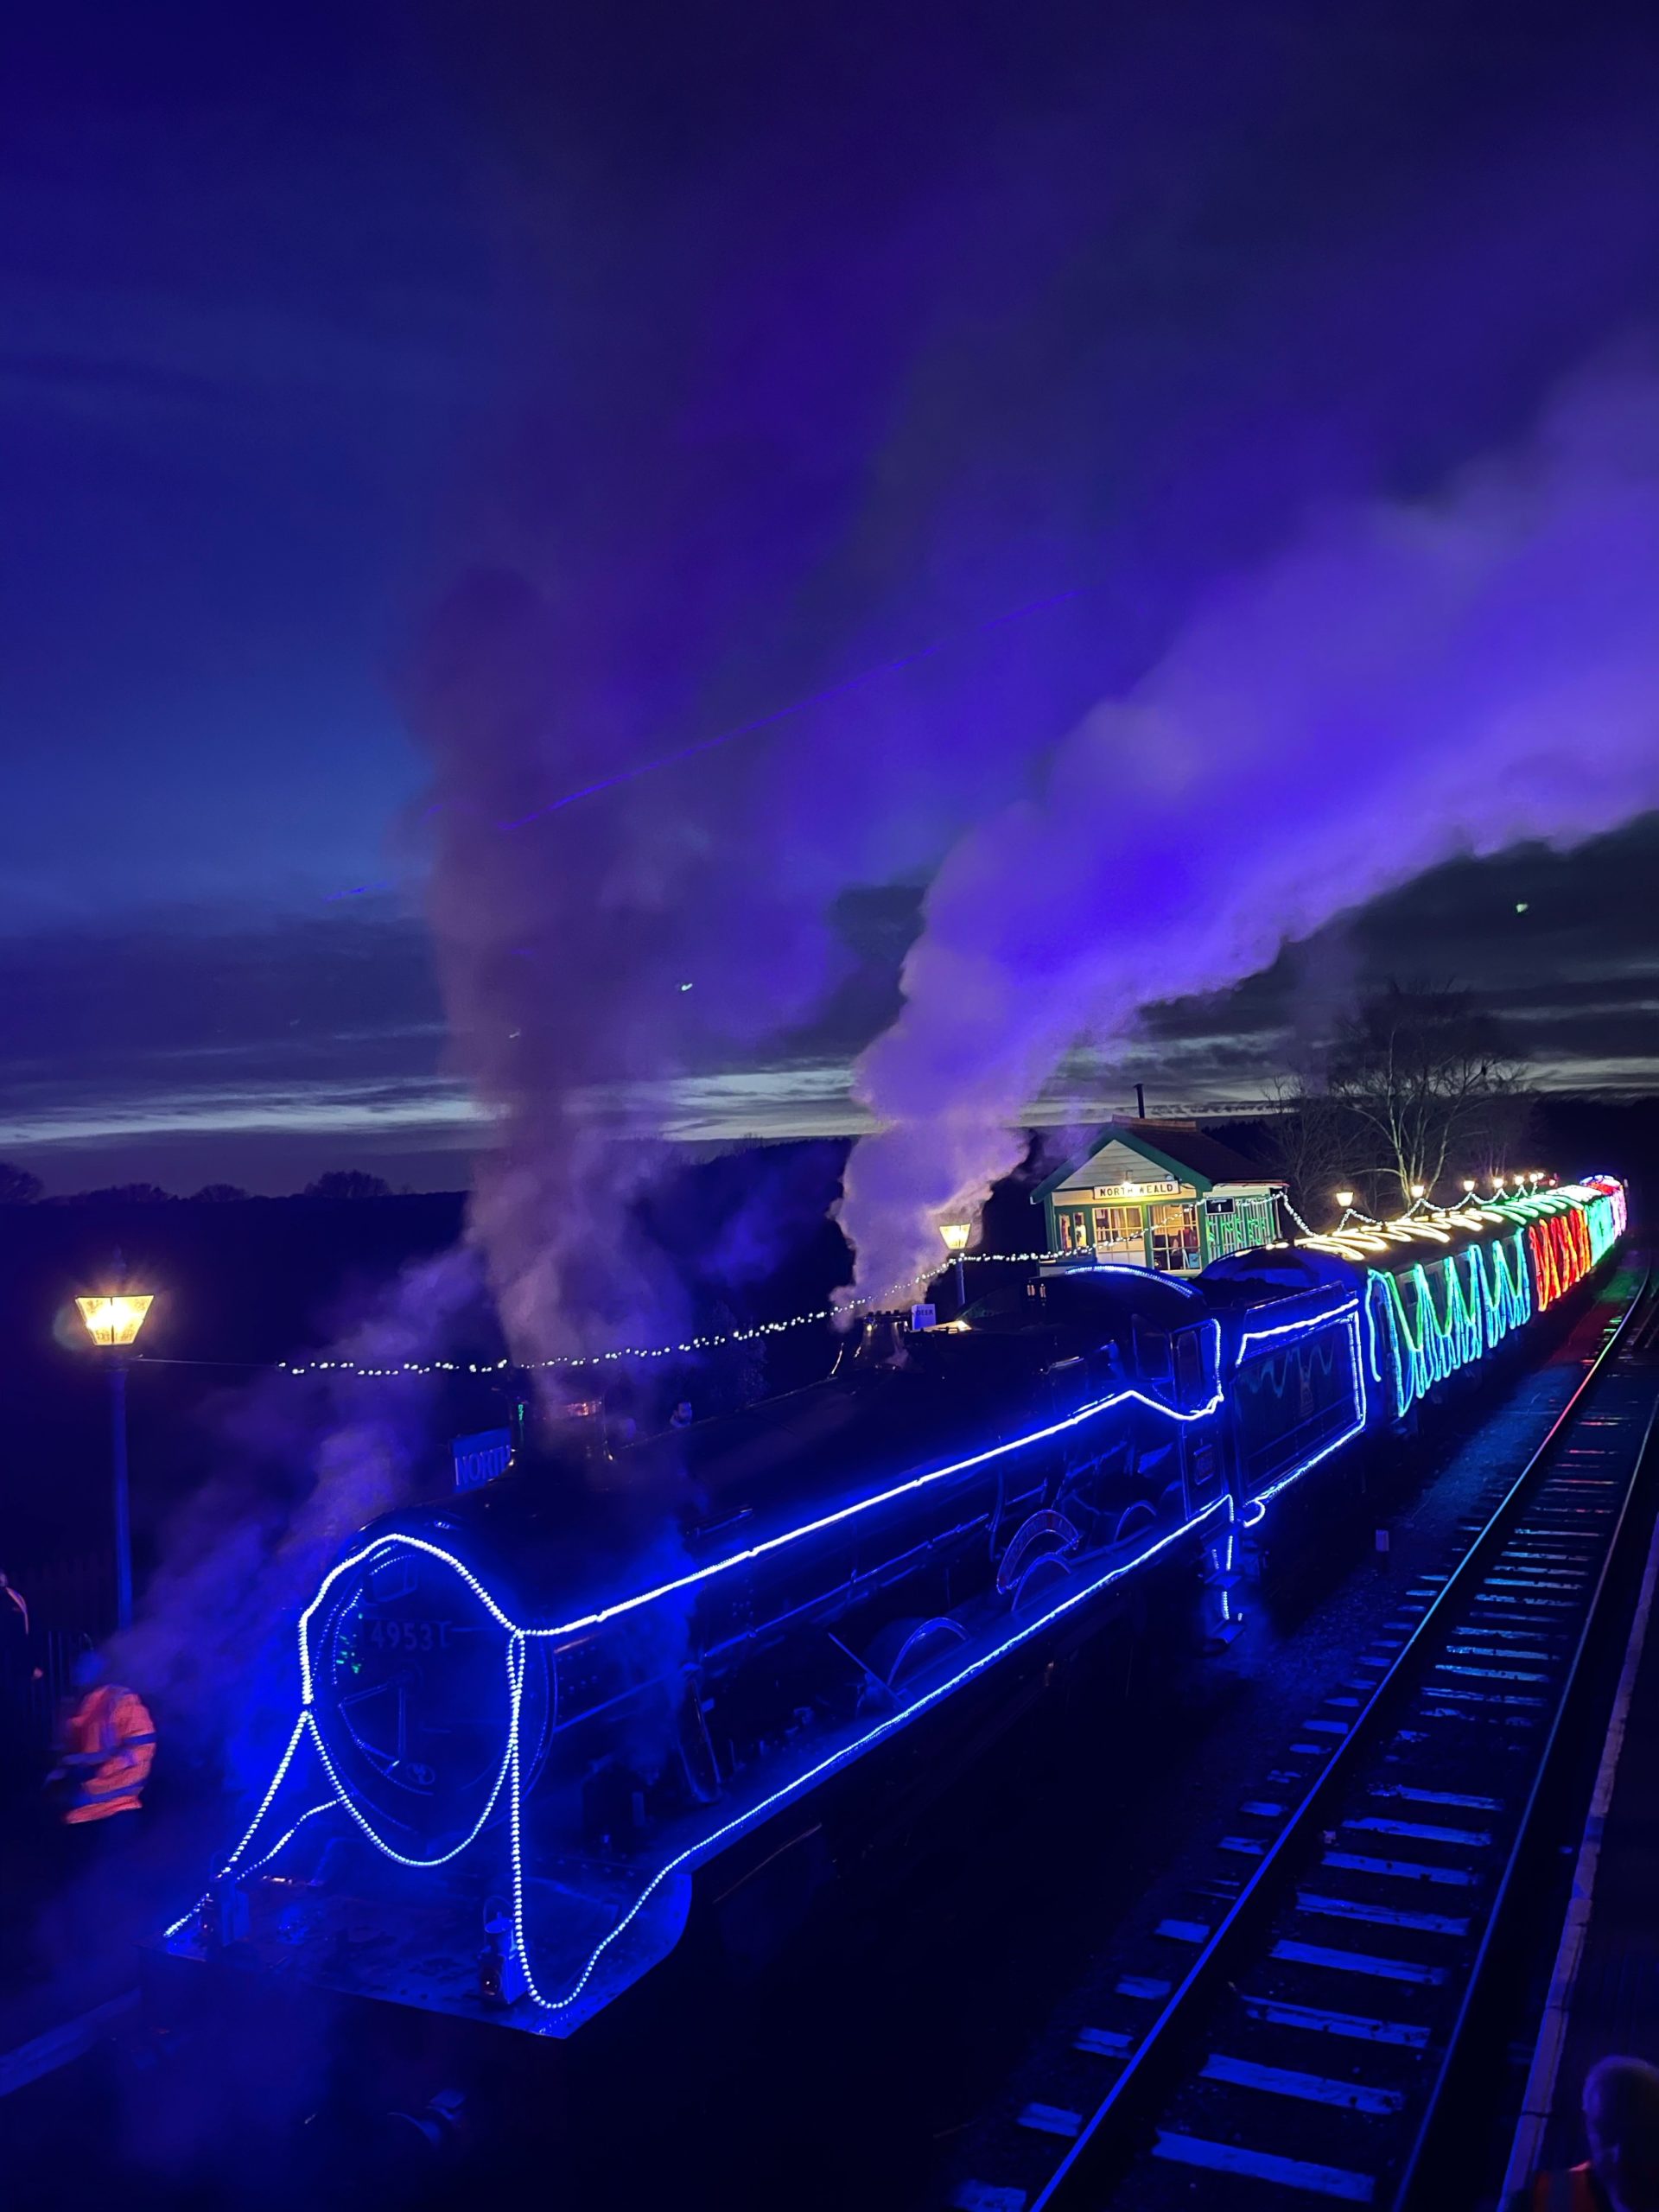 steam train at night lit up with christmas lighs